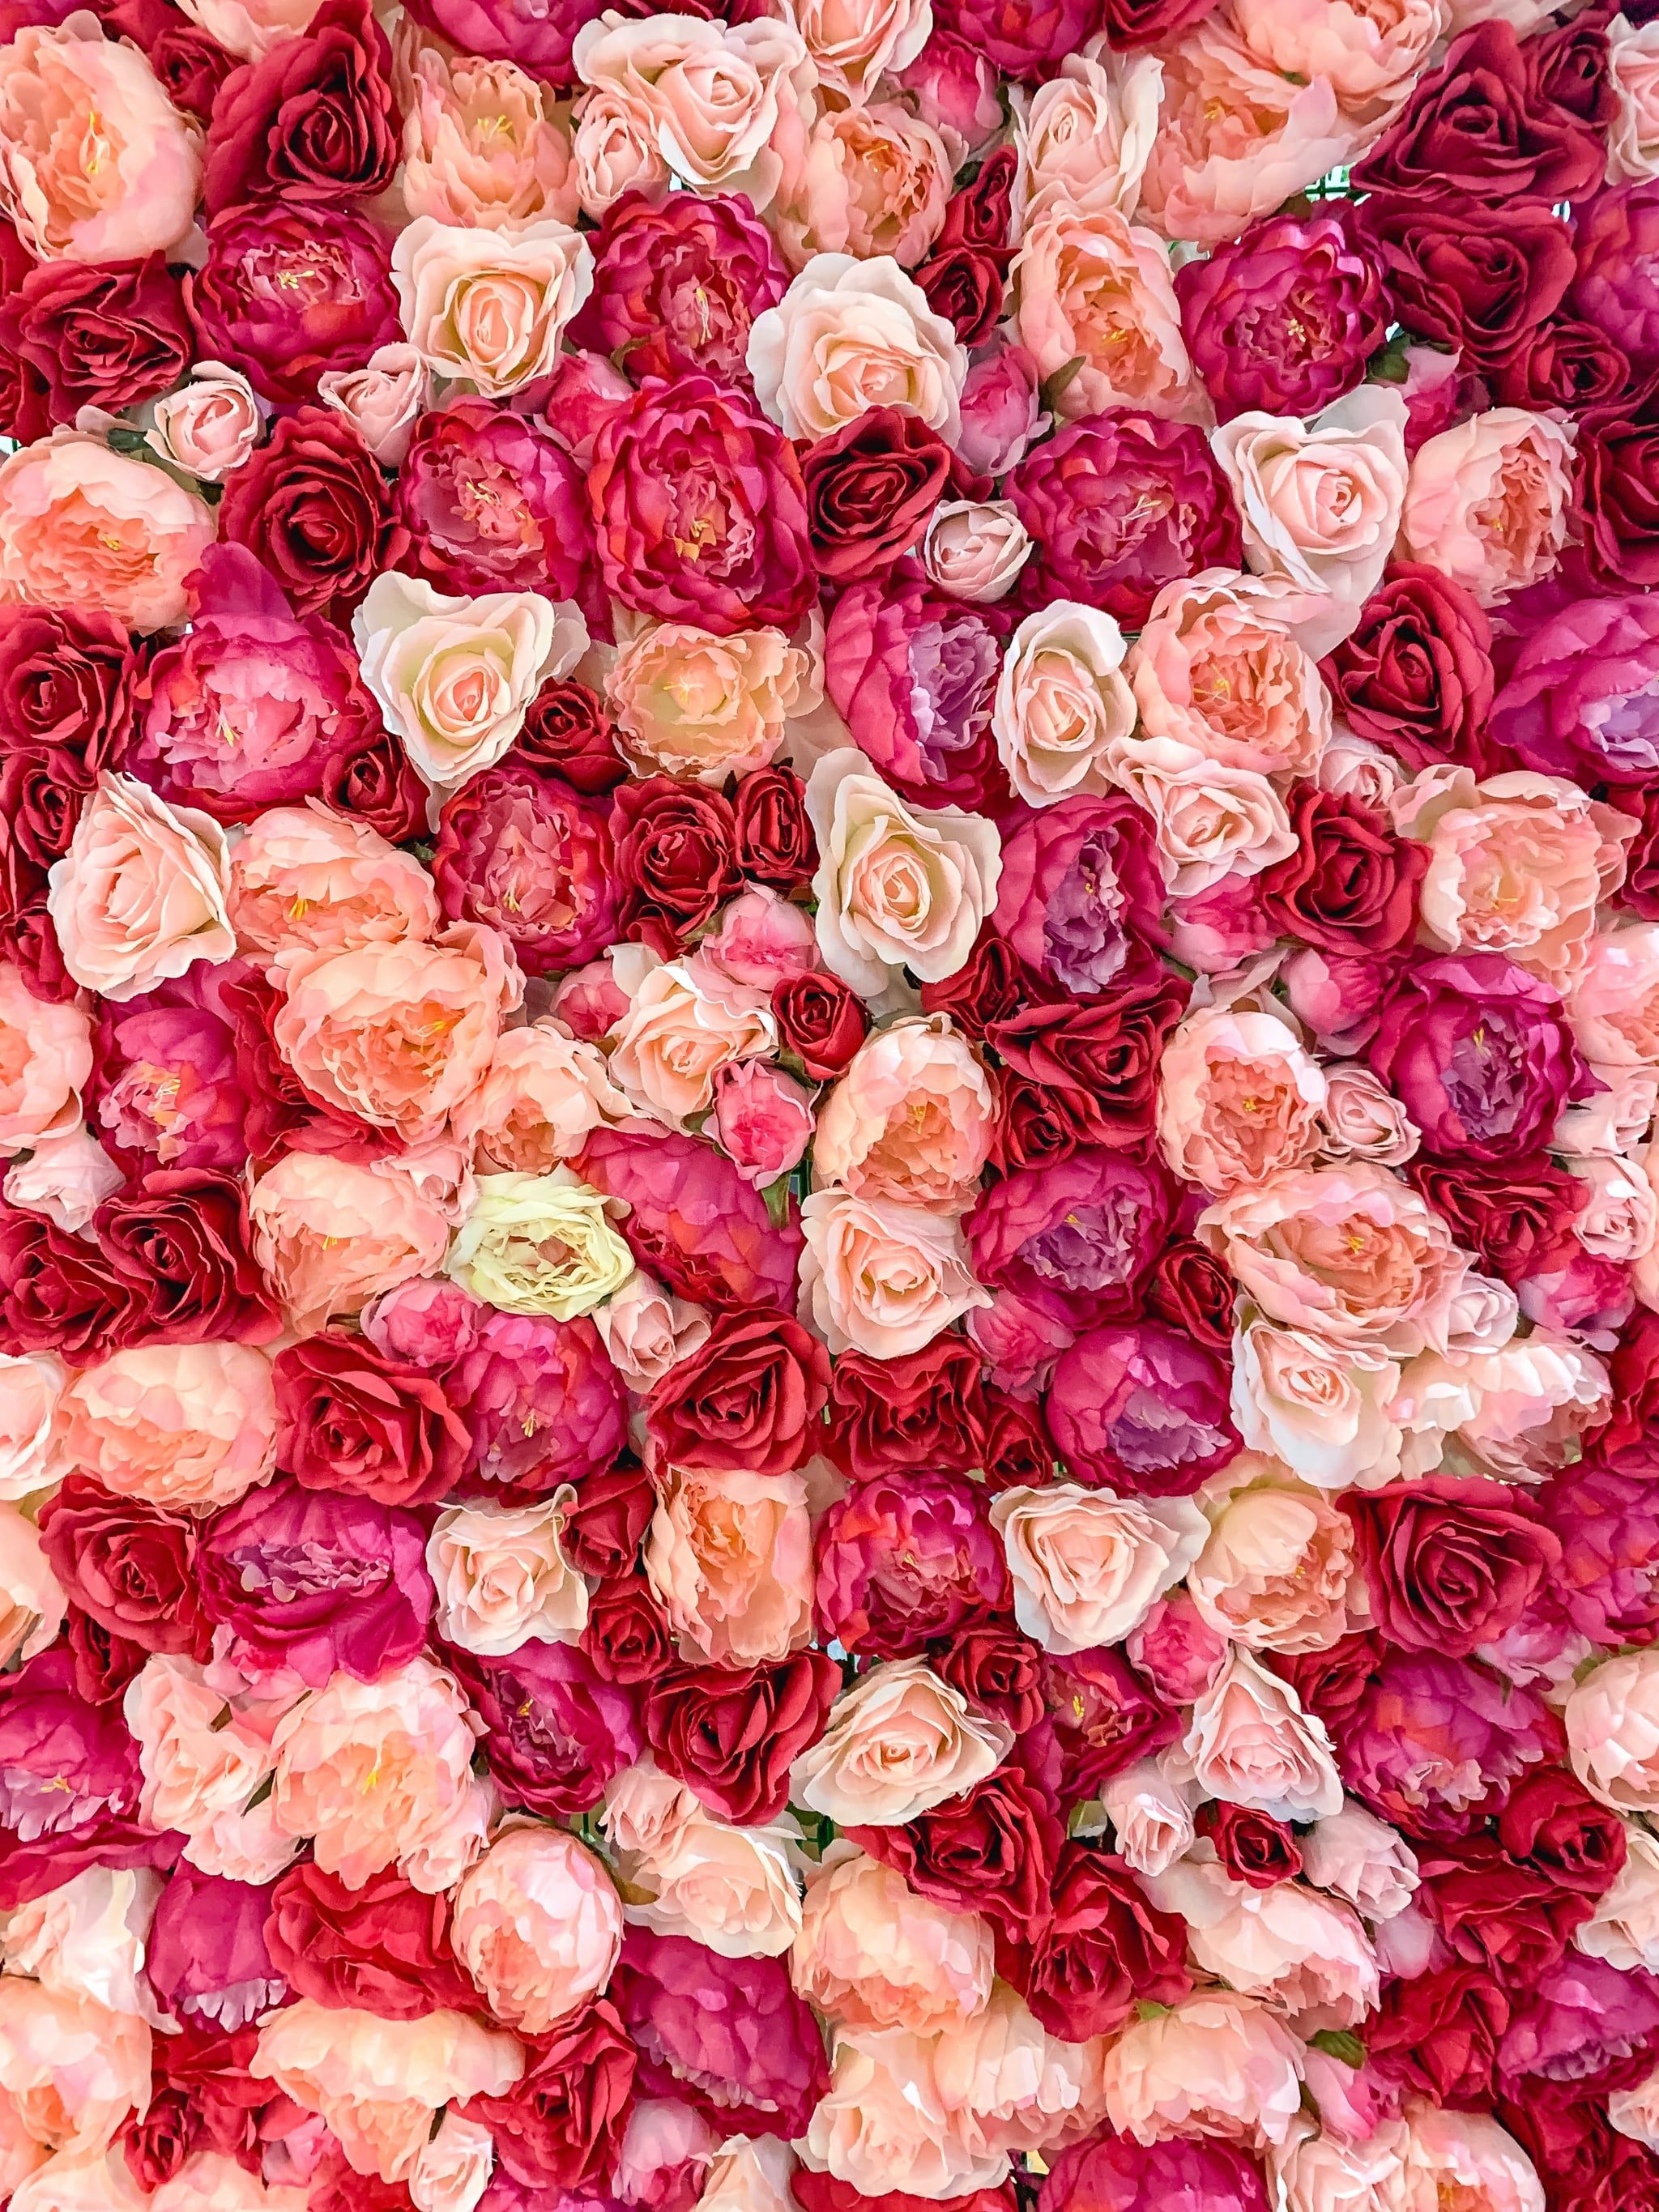 A close up of the rose wall - Valentine's Day, February, roses, garden